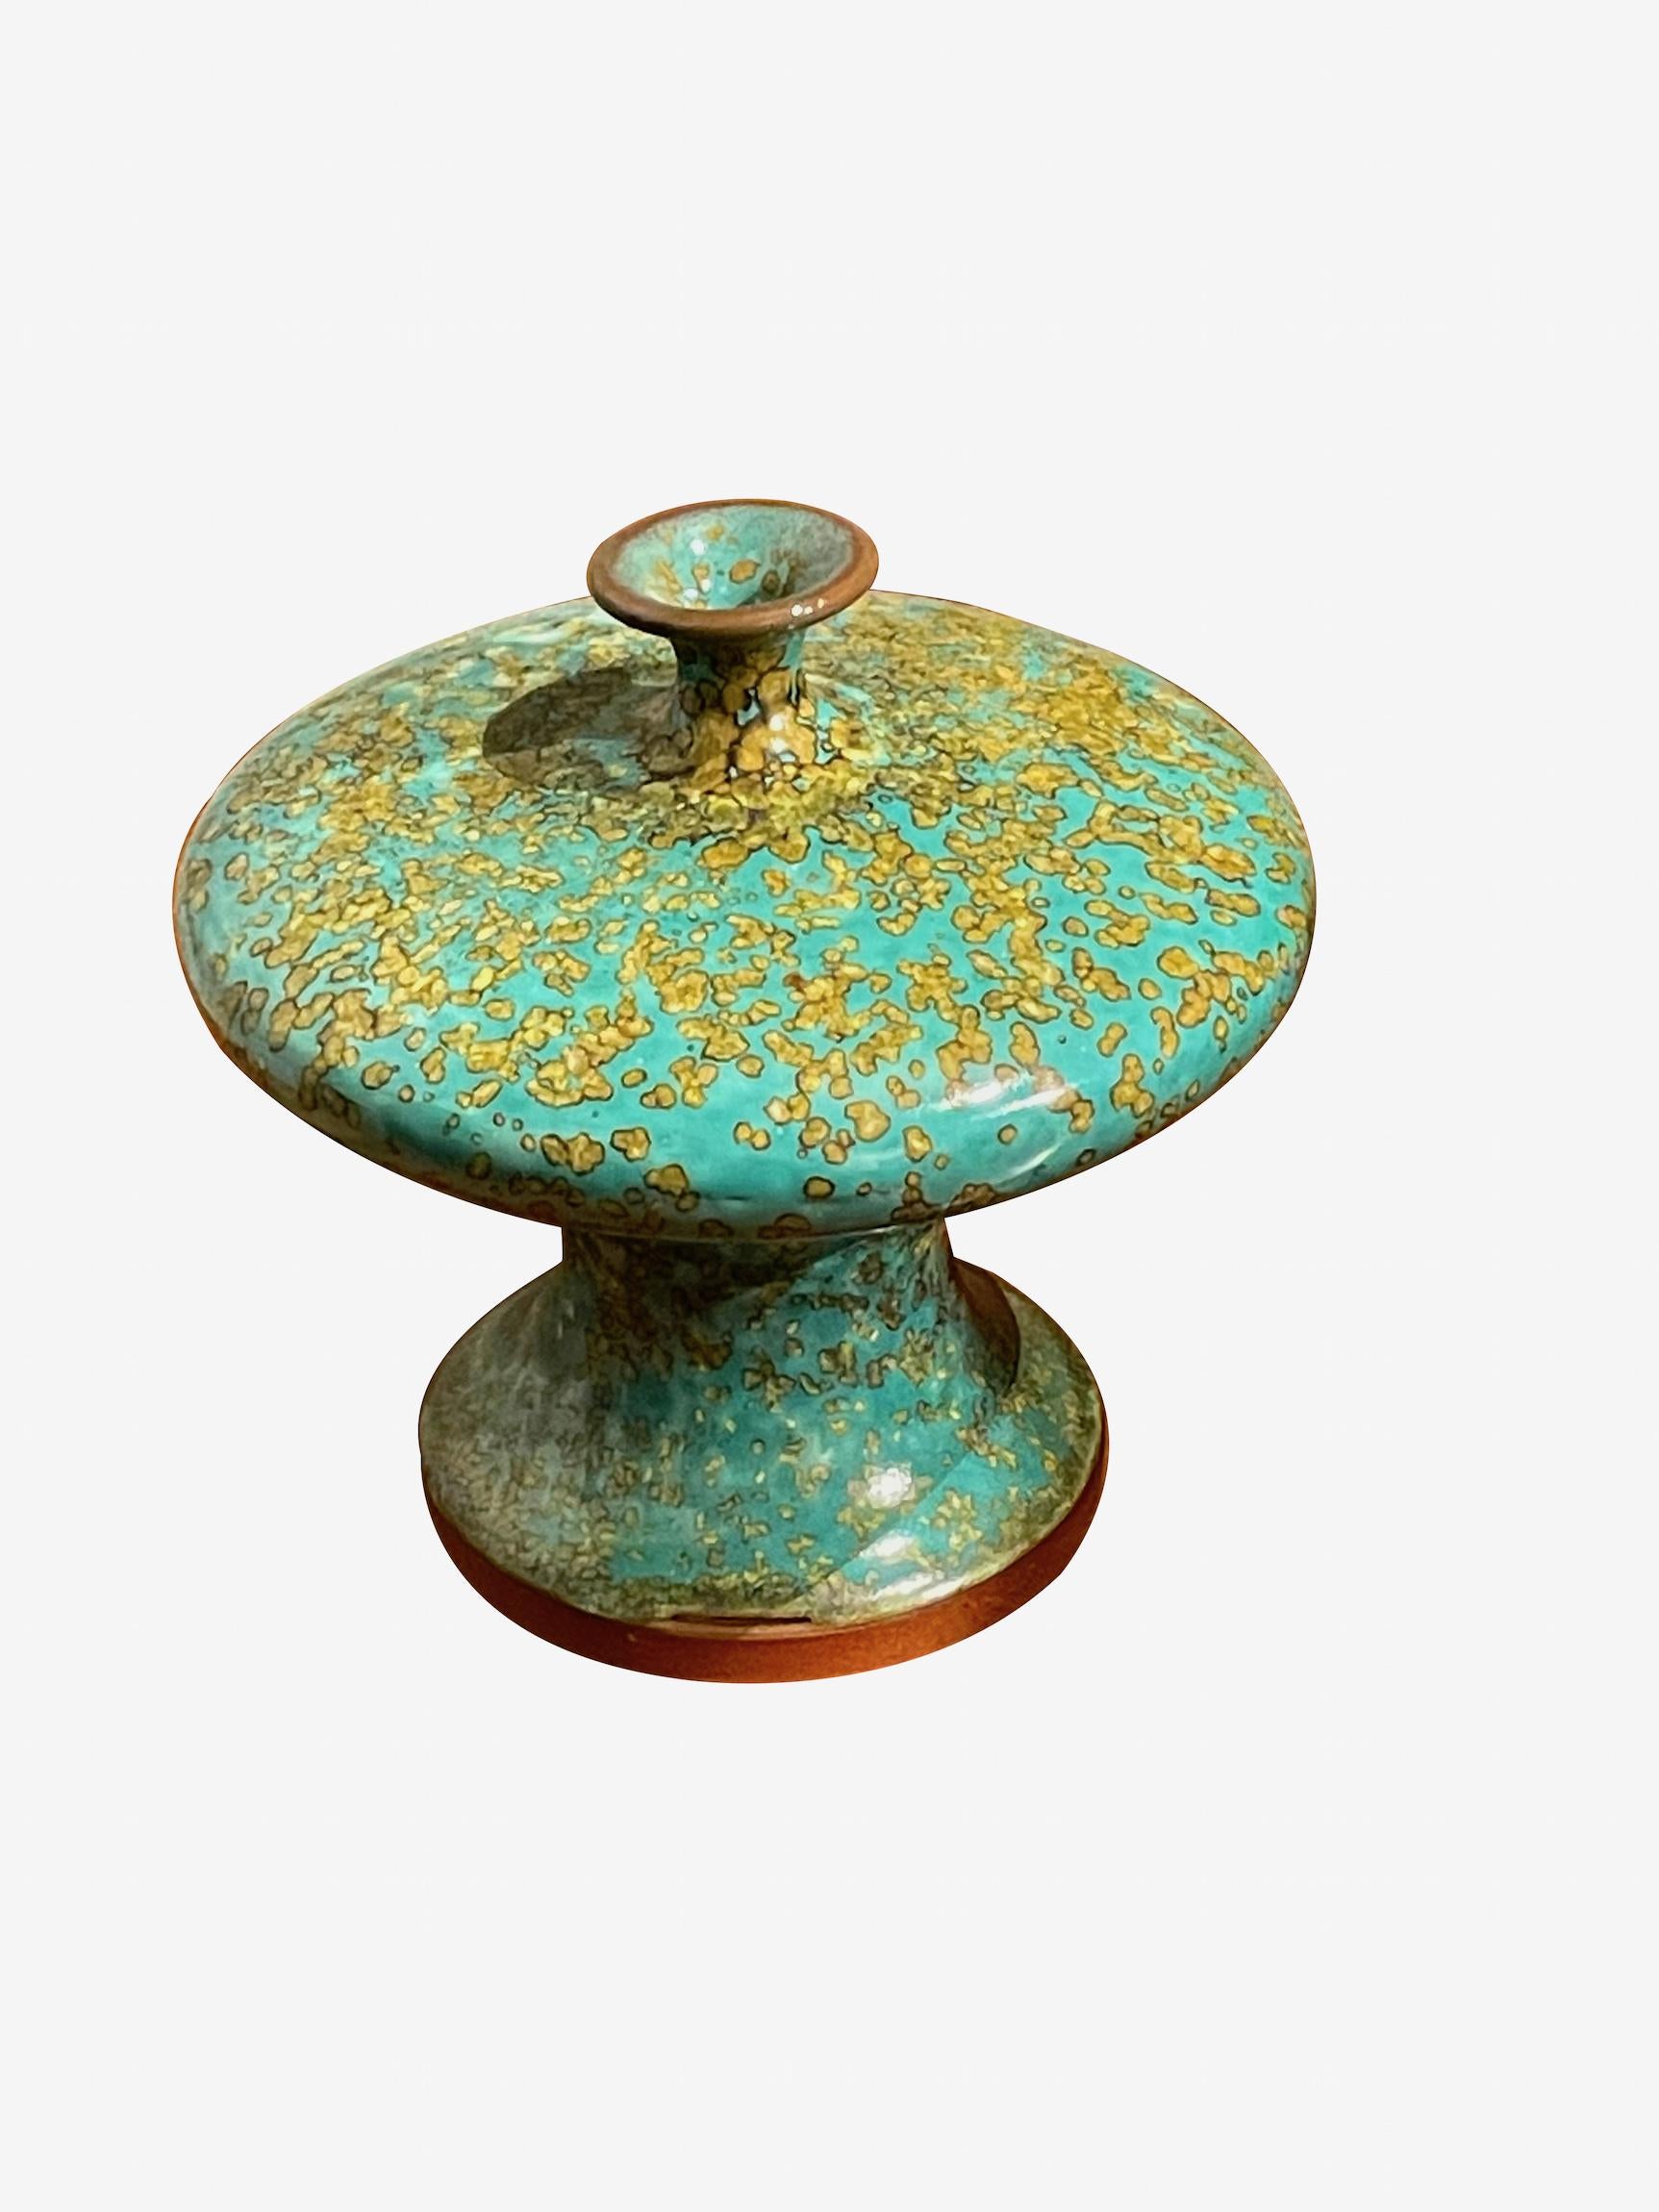 Contemporary Chinese turquoise with gold speckled glaze vase.
Saucer shaped top with small spout.
One of several pieces from a large collection.